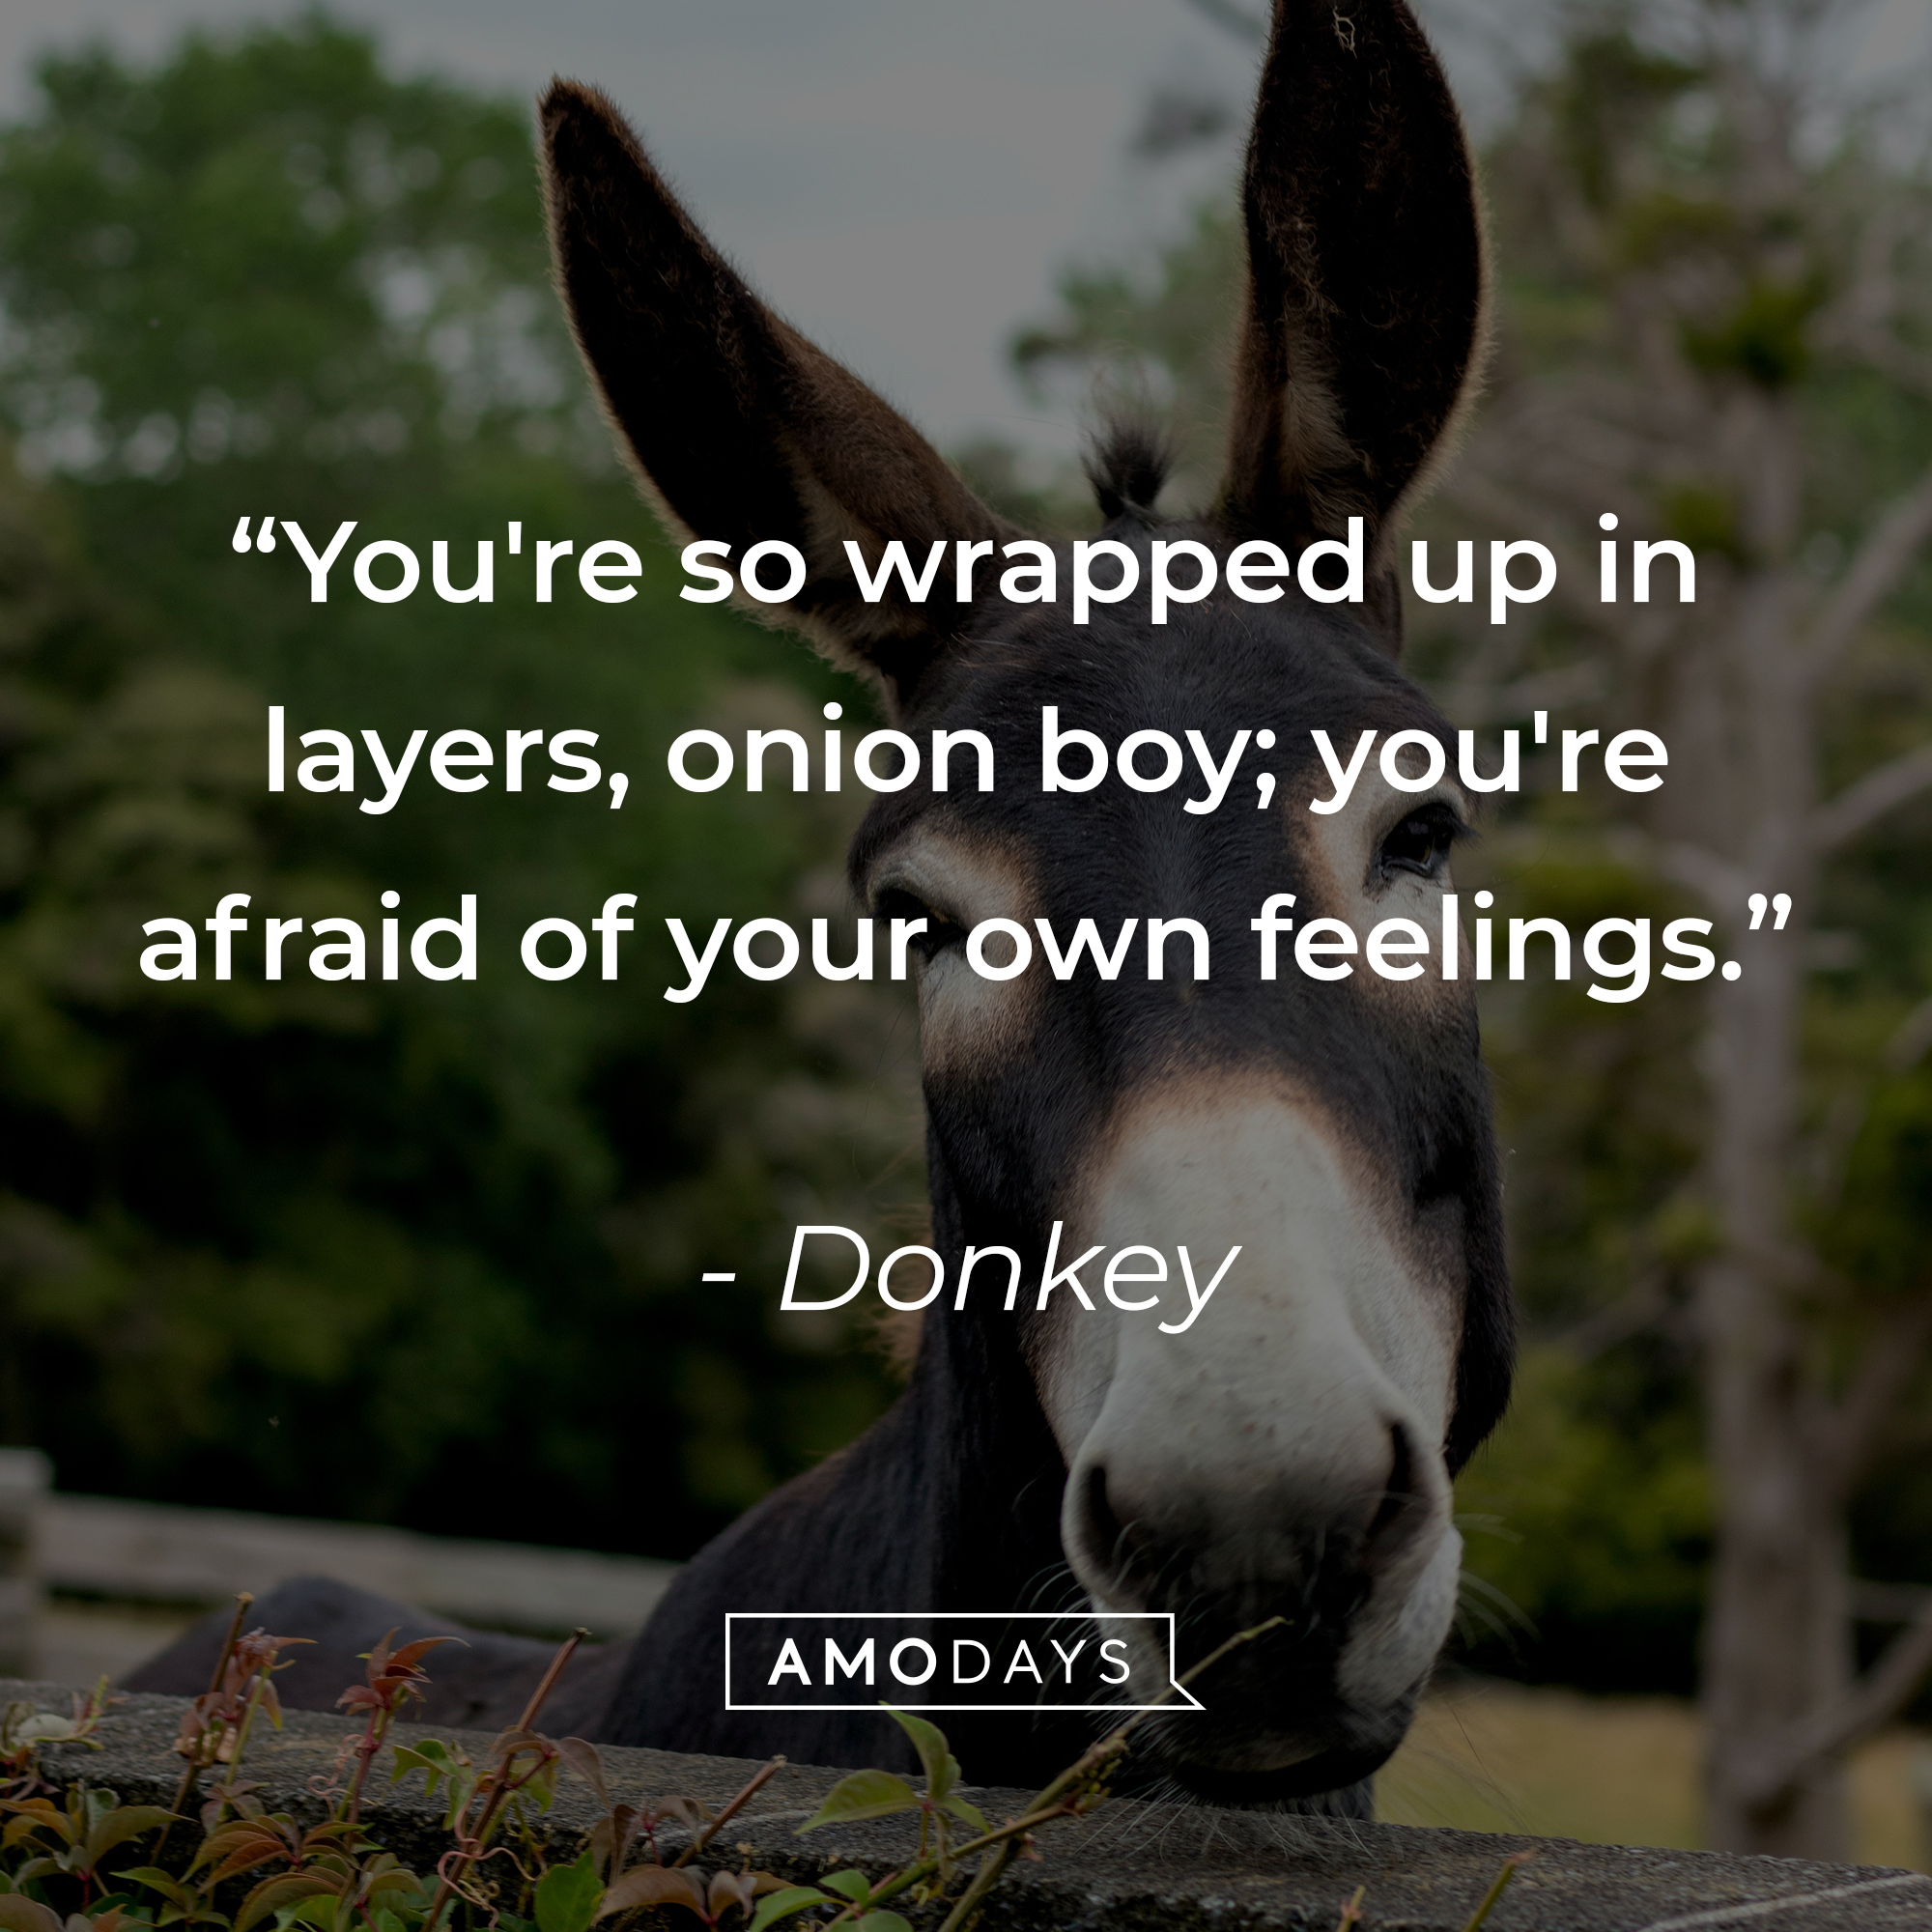 Donkey's quote: "You're so wrapped up in layers, onion boy; you're afraid of your own feelings." | Source: Unsplash